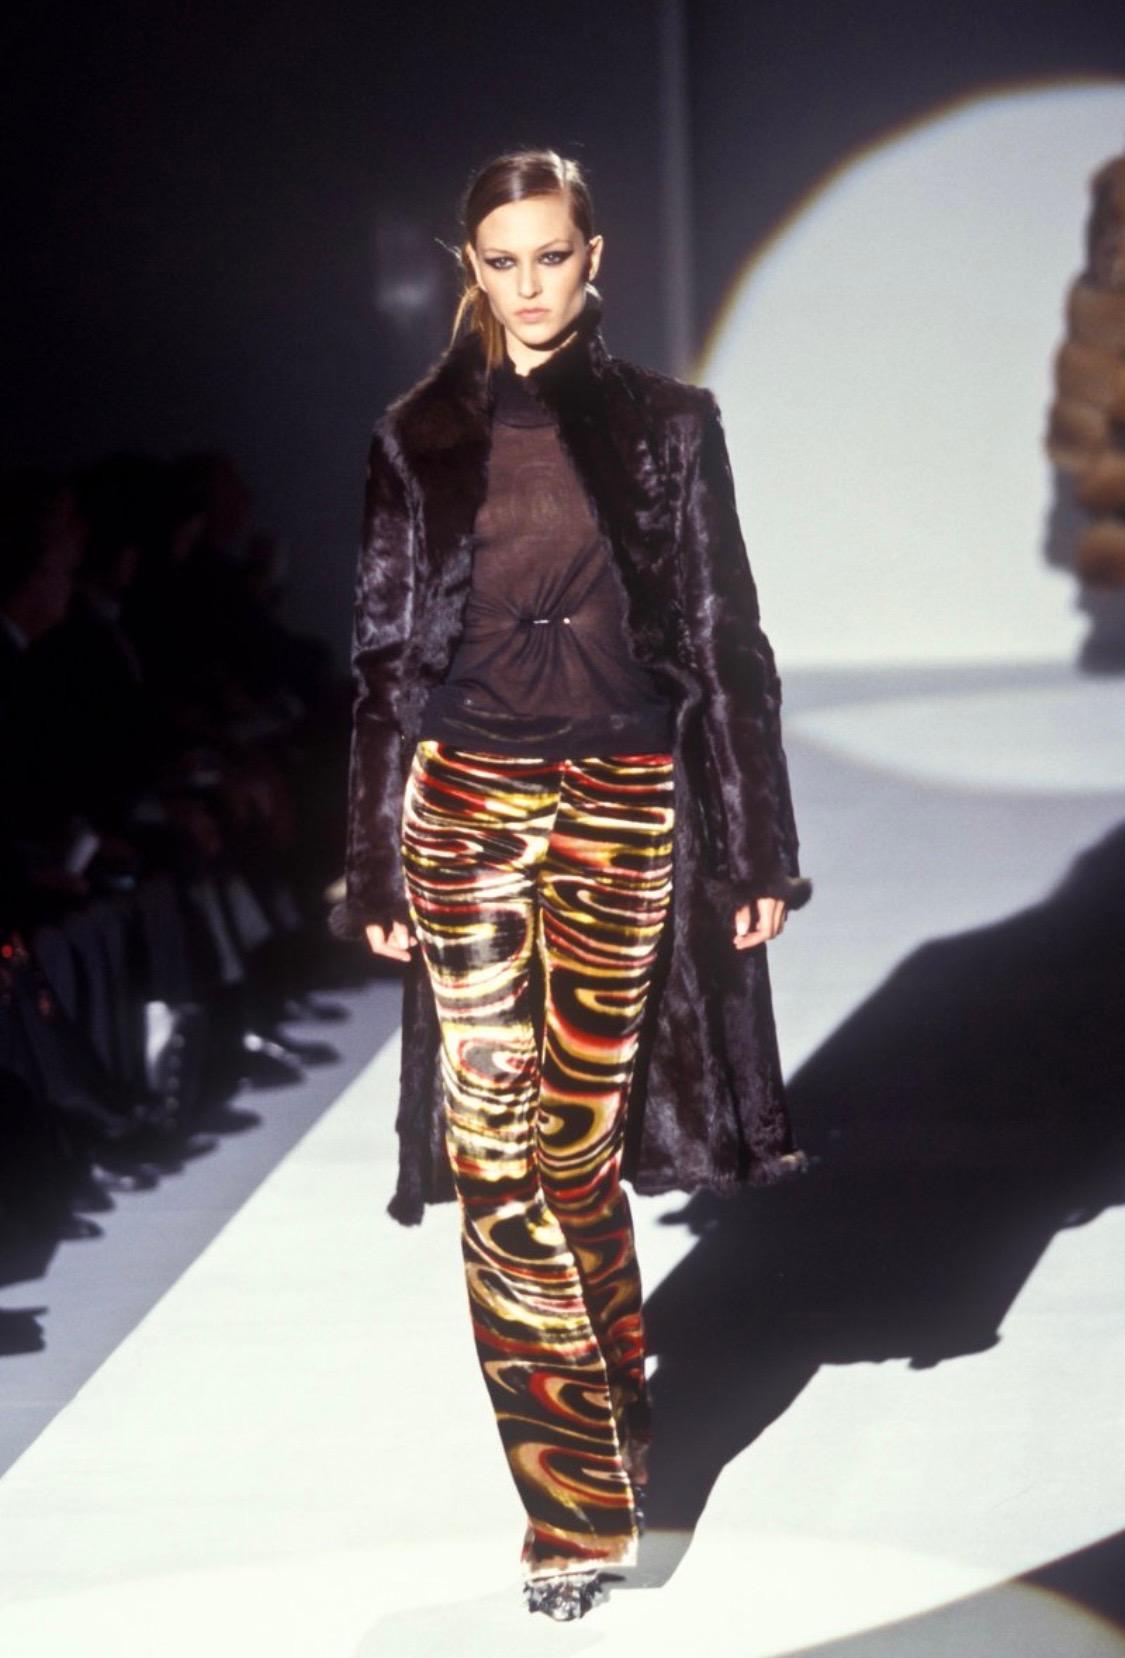 Presenting From the Gucci Fall/Winter 1999 collection designed by Tom Ford, this gorgeous lucite hoop, bucket bag features Tom Ford's memorable psychedelic pattern in silk velvet. The same pattern is seen on the runway on other pieces in this